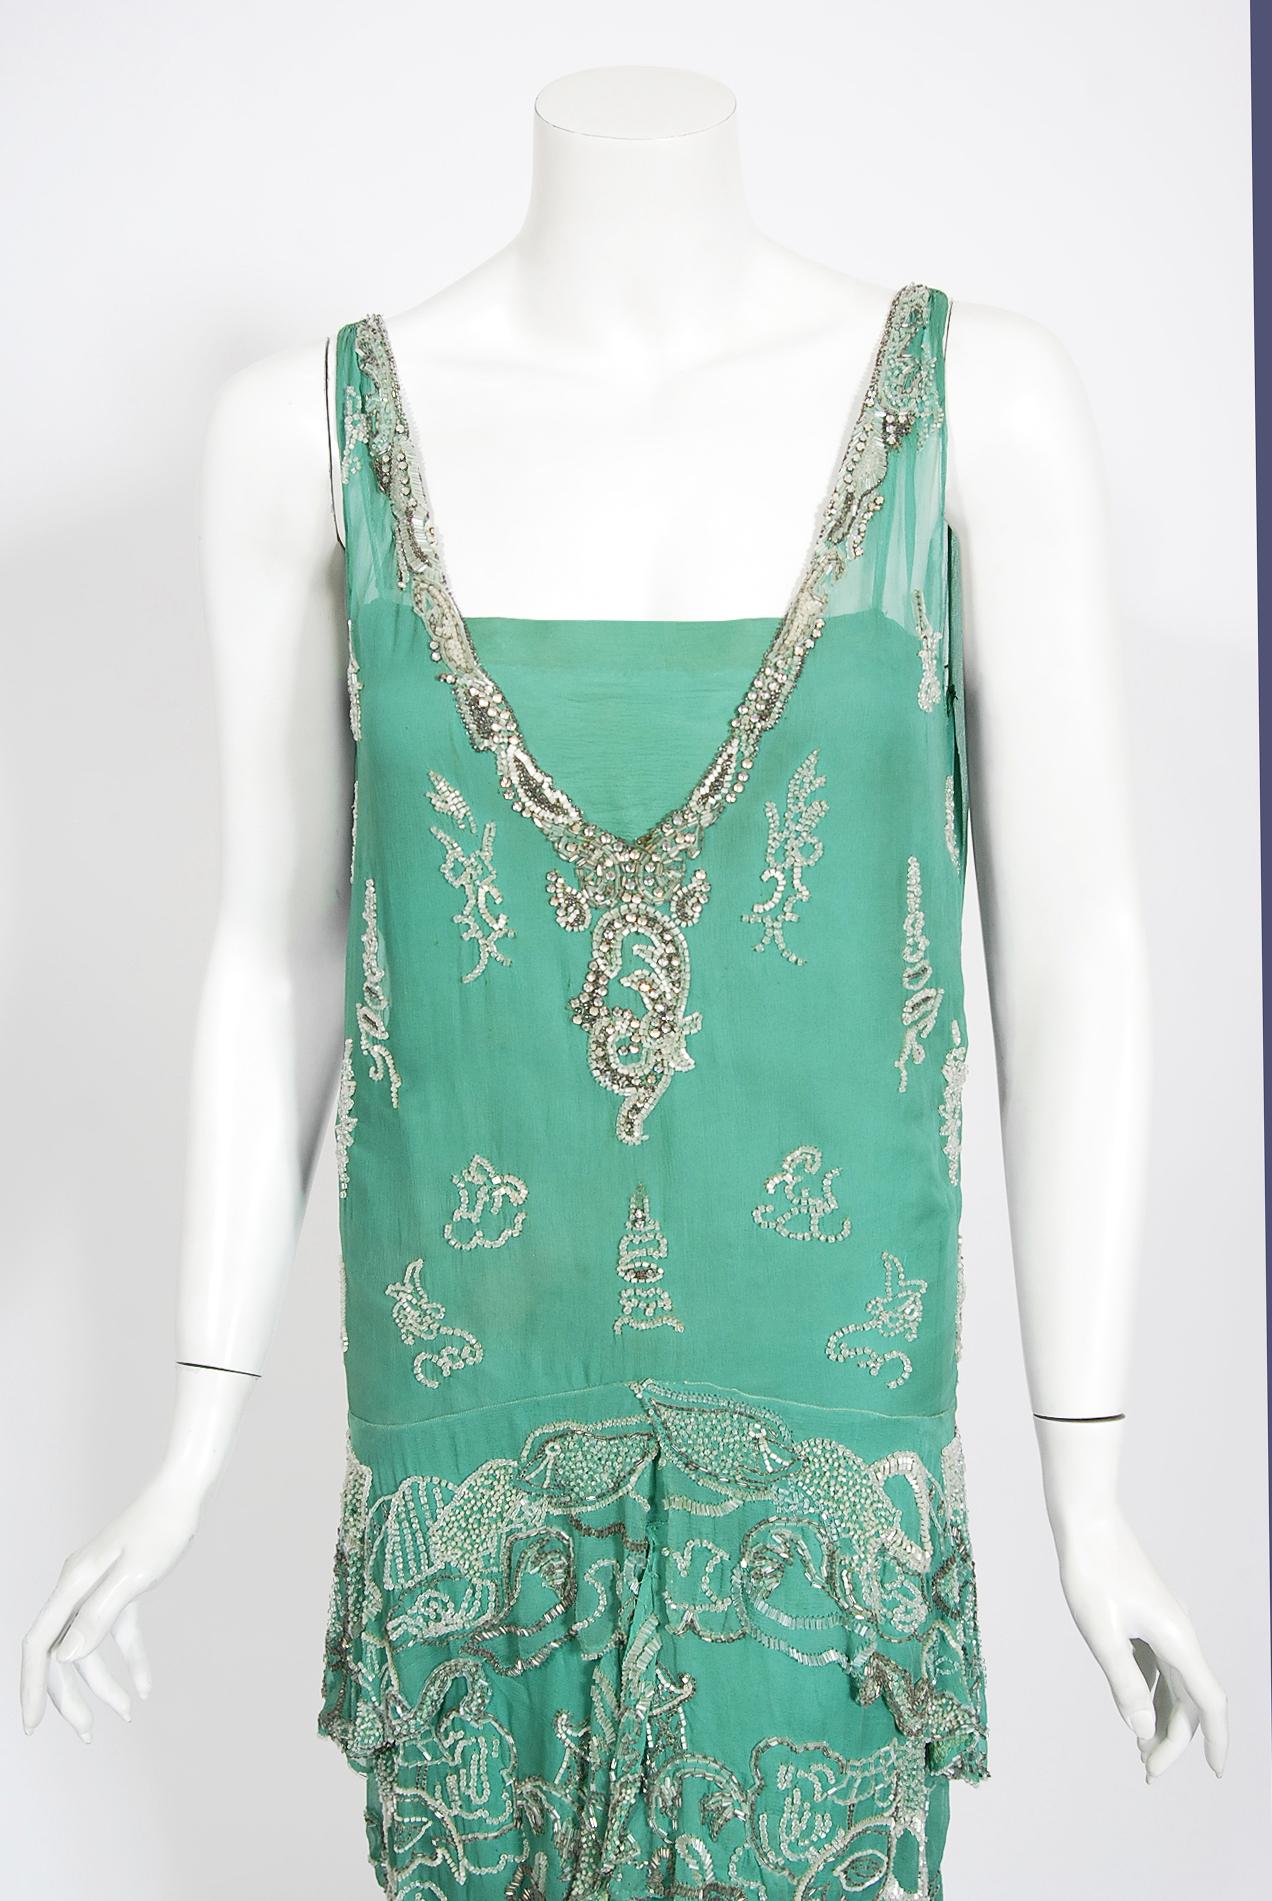 Absolutely gorgeous and extremely rare hand beaded Jean Patou haute couture attributed dress dating back to the mid-1920's. As shown, in my research I found an almost identical dress with the same novelty beaded Asian themed motif. From the start of